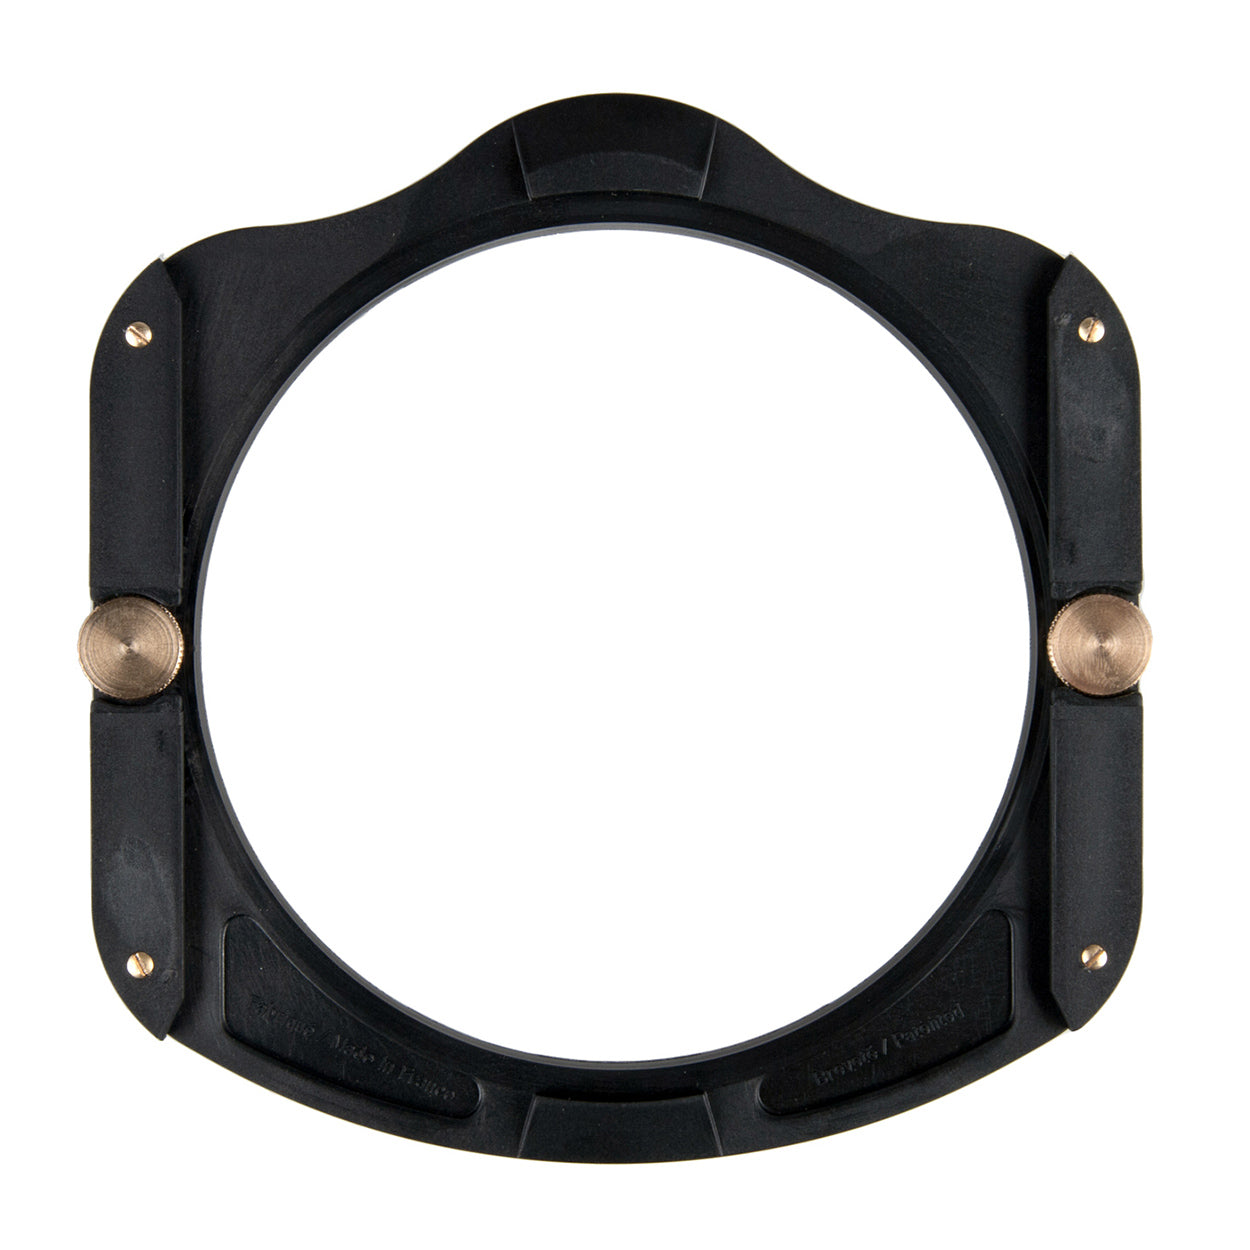 Filter Holder for X-pro Series Filters